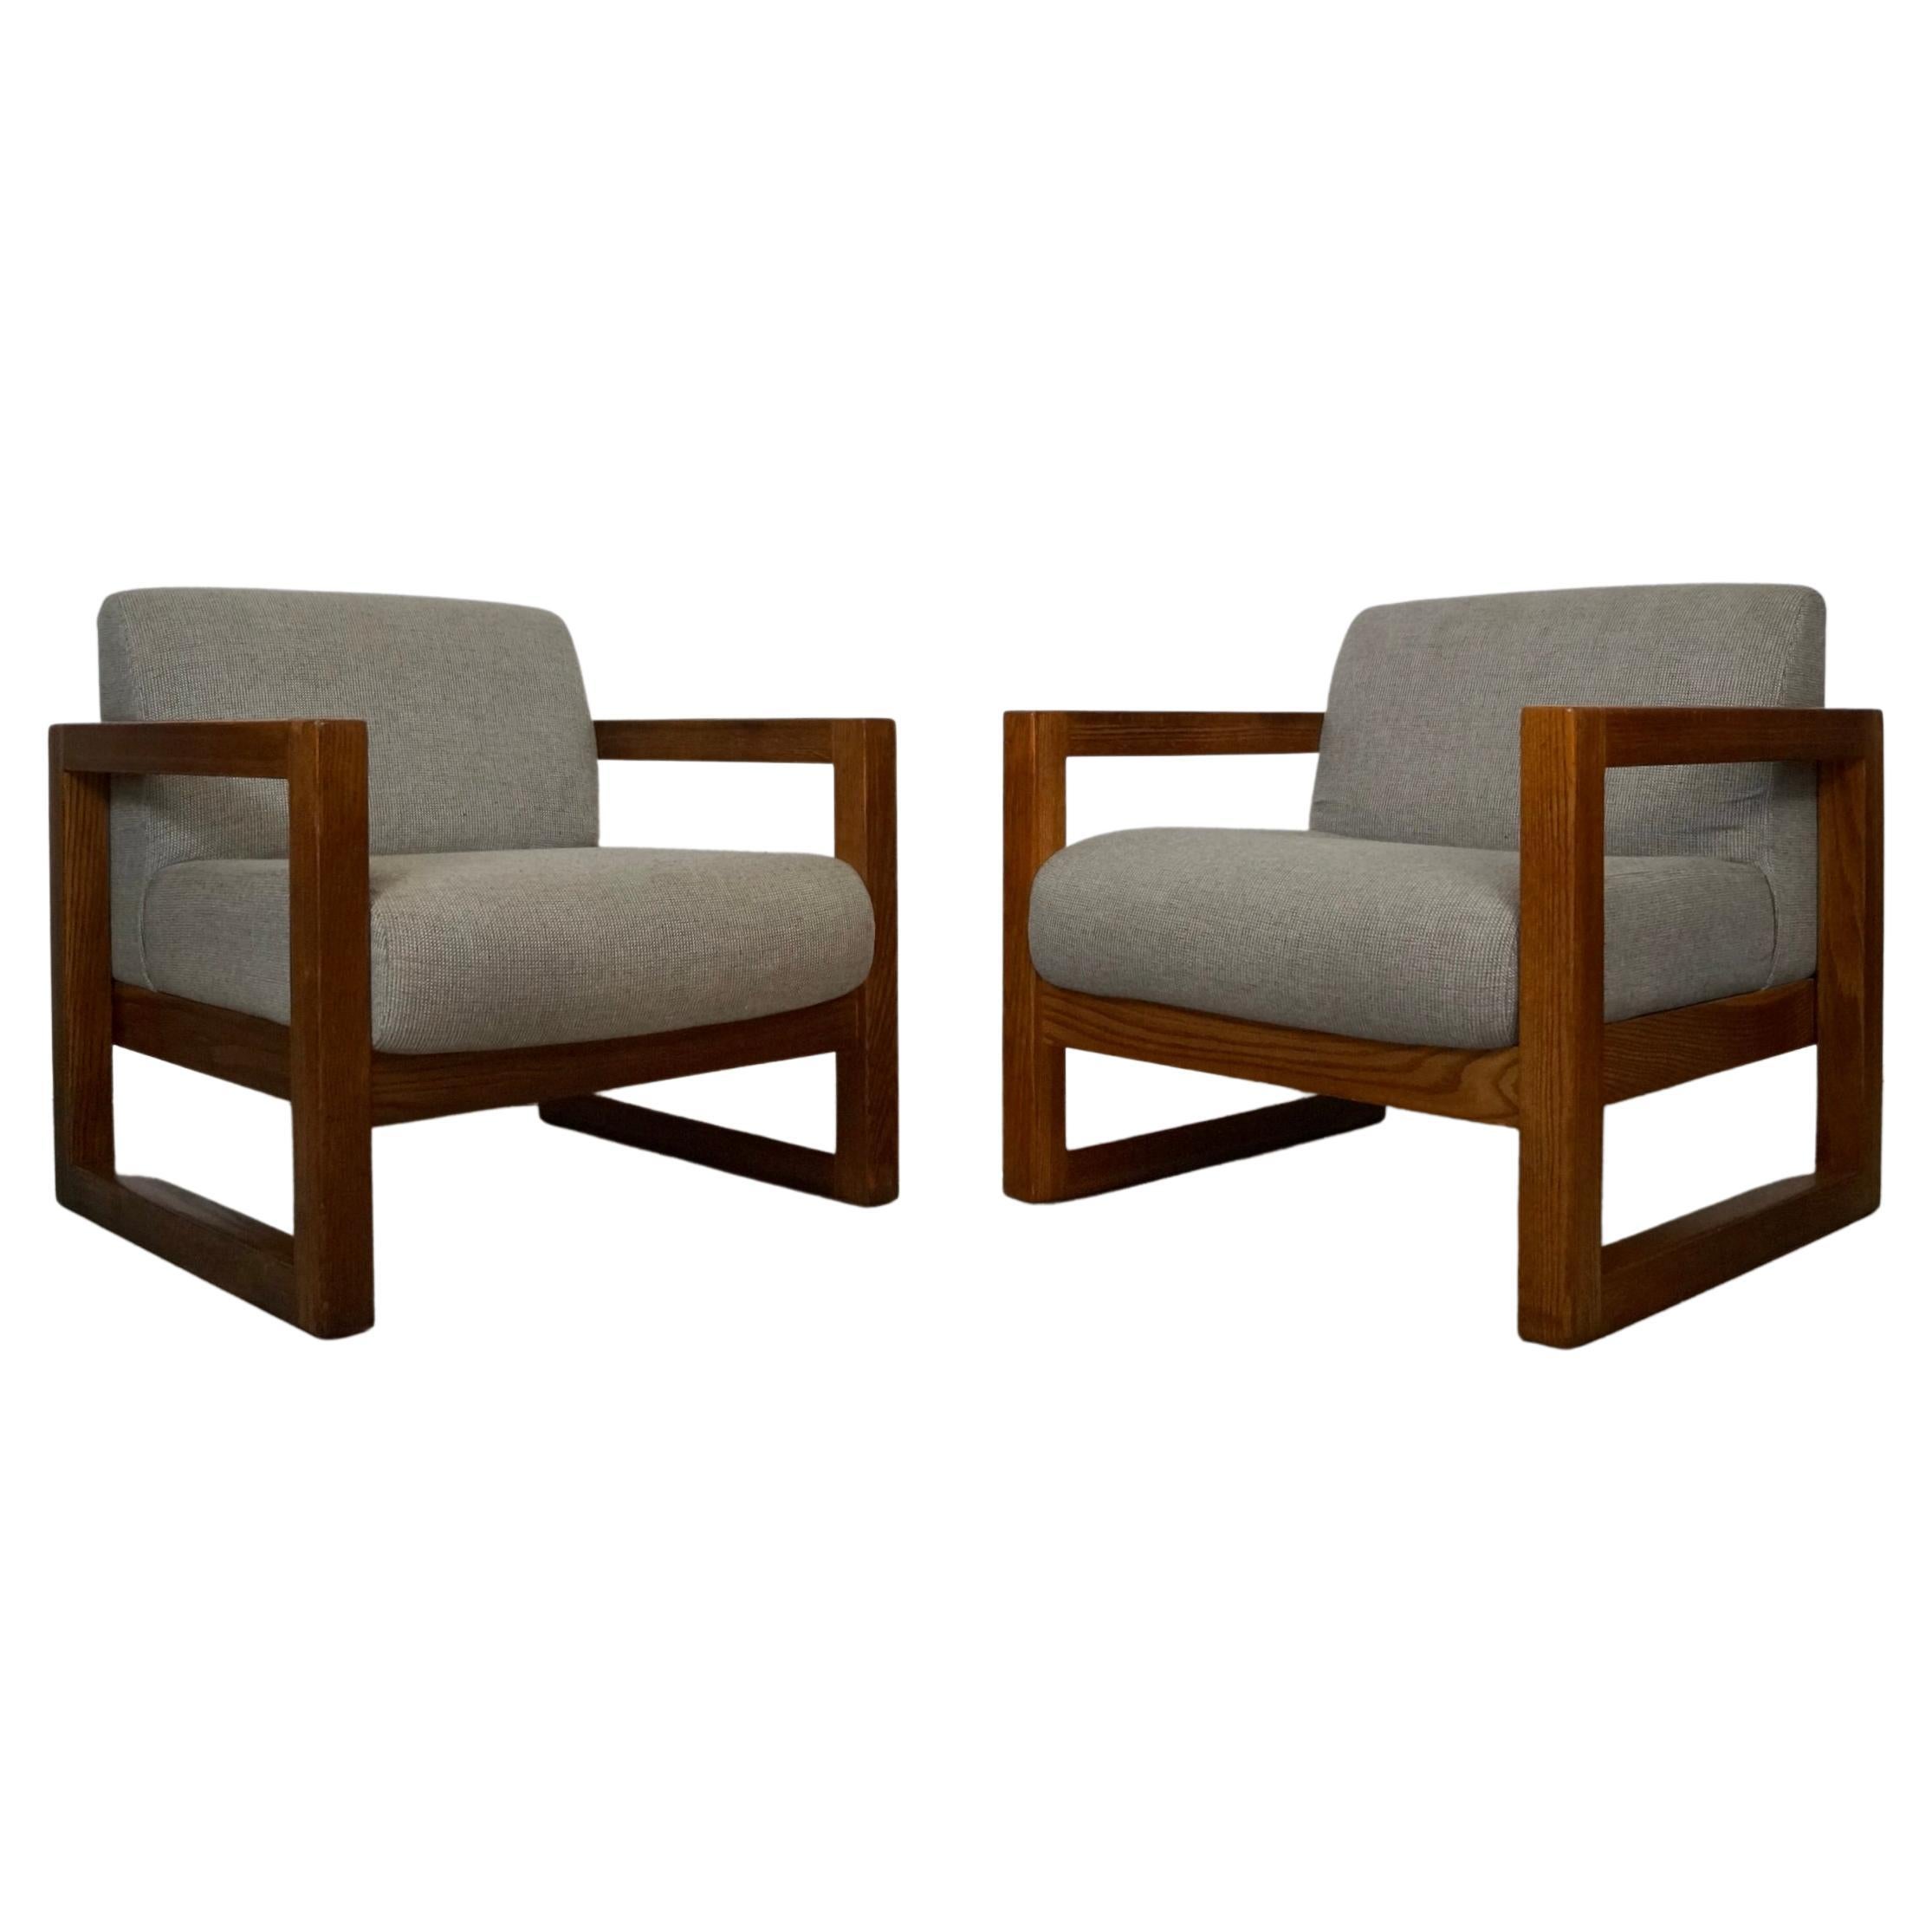 Vintage Postmodern Solid Oak Cube Lounge Chairs - a Pair